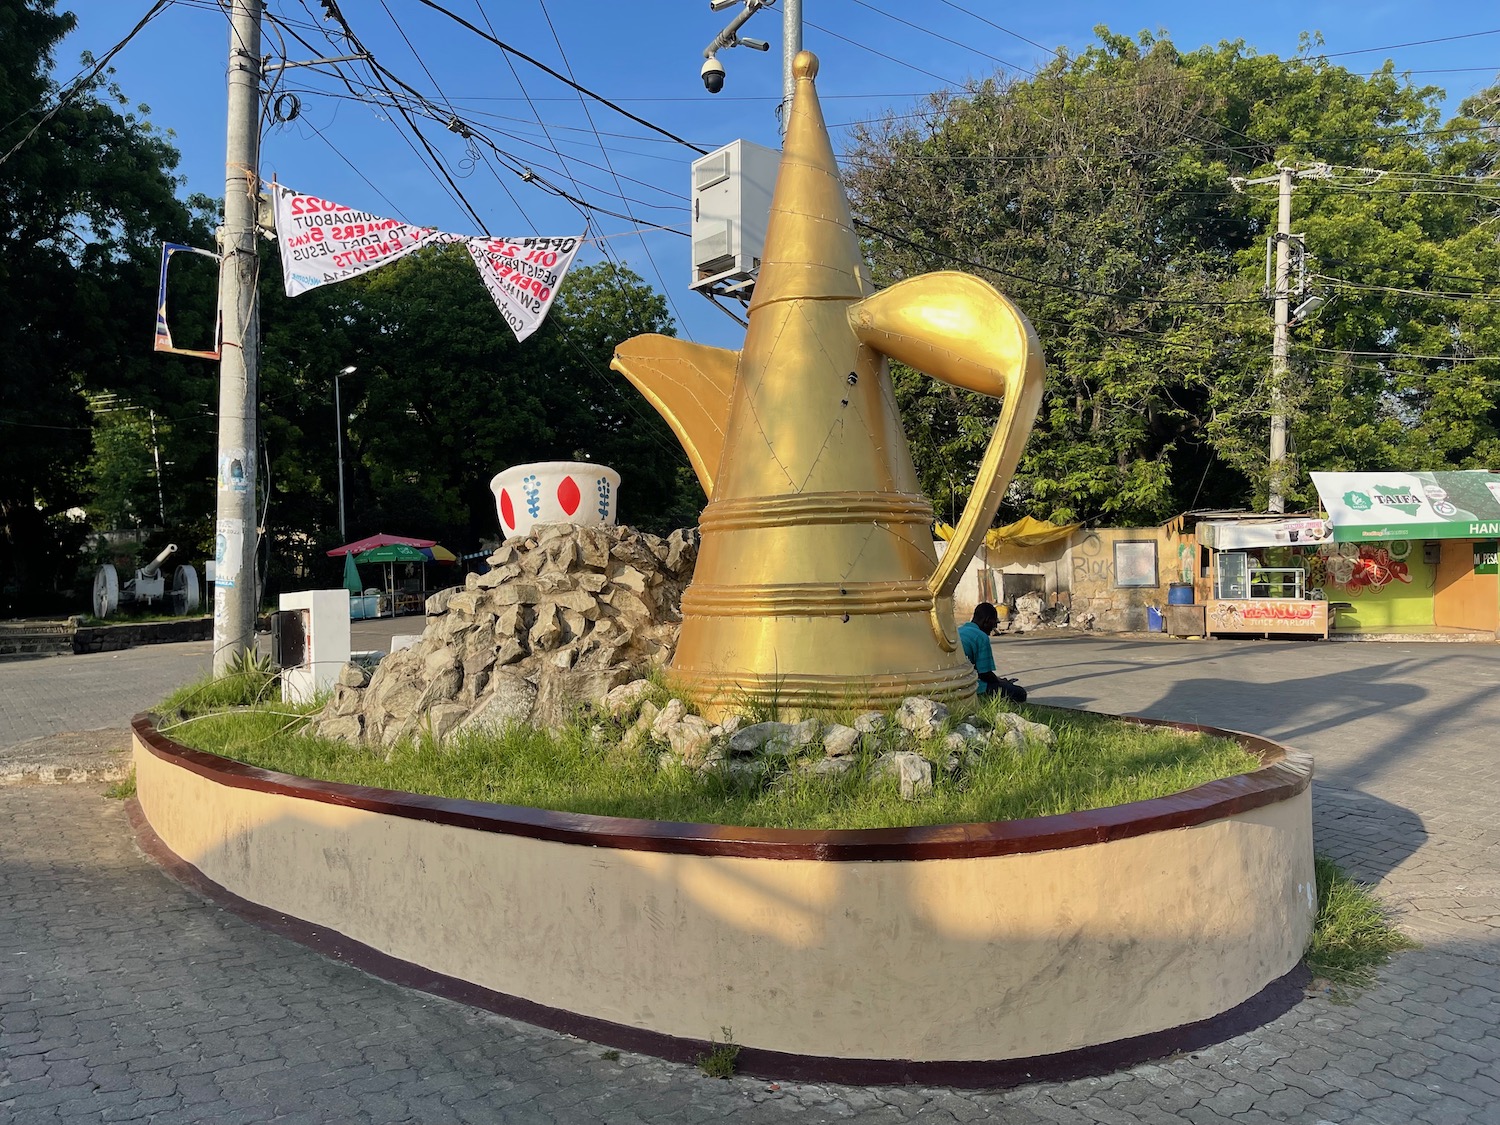 a large gold teapot statue in a circular area